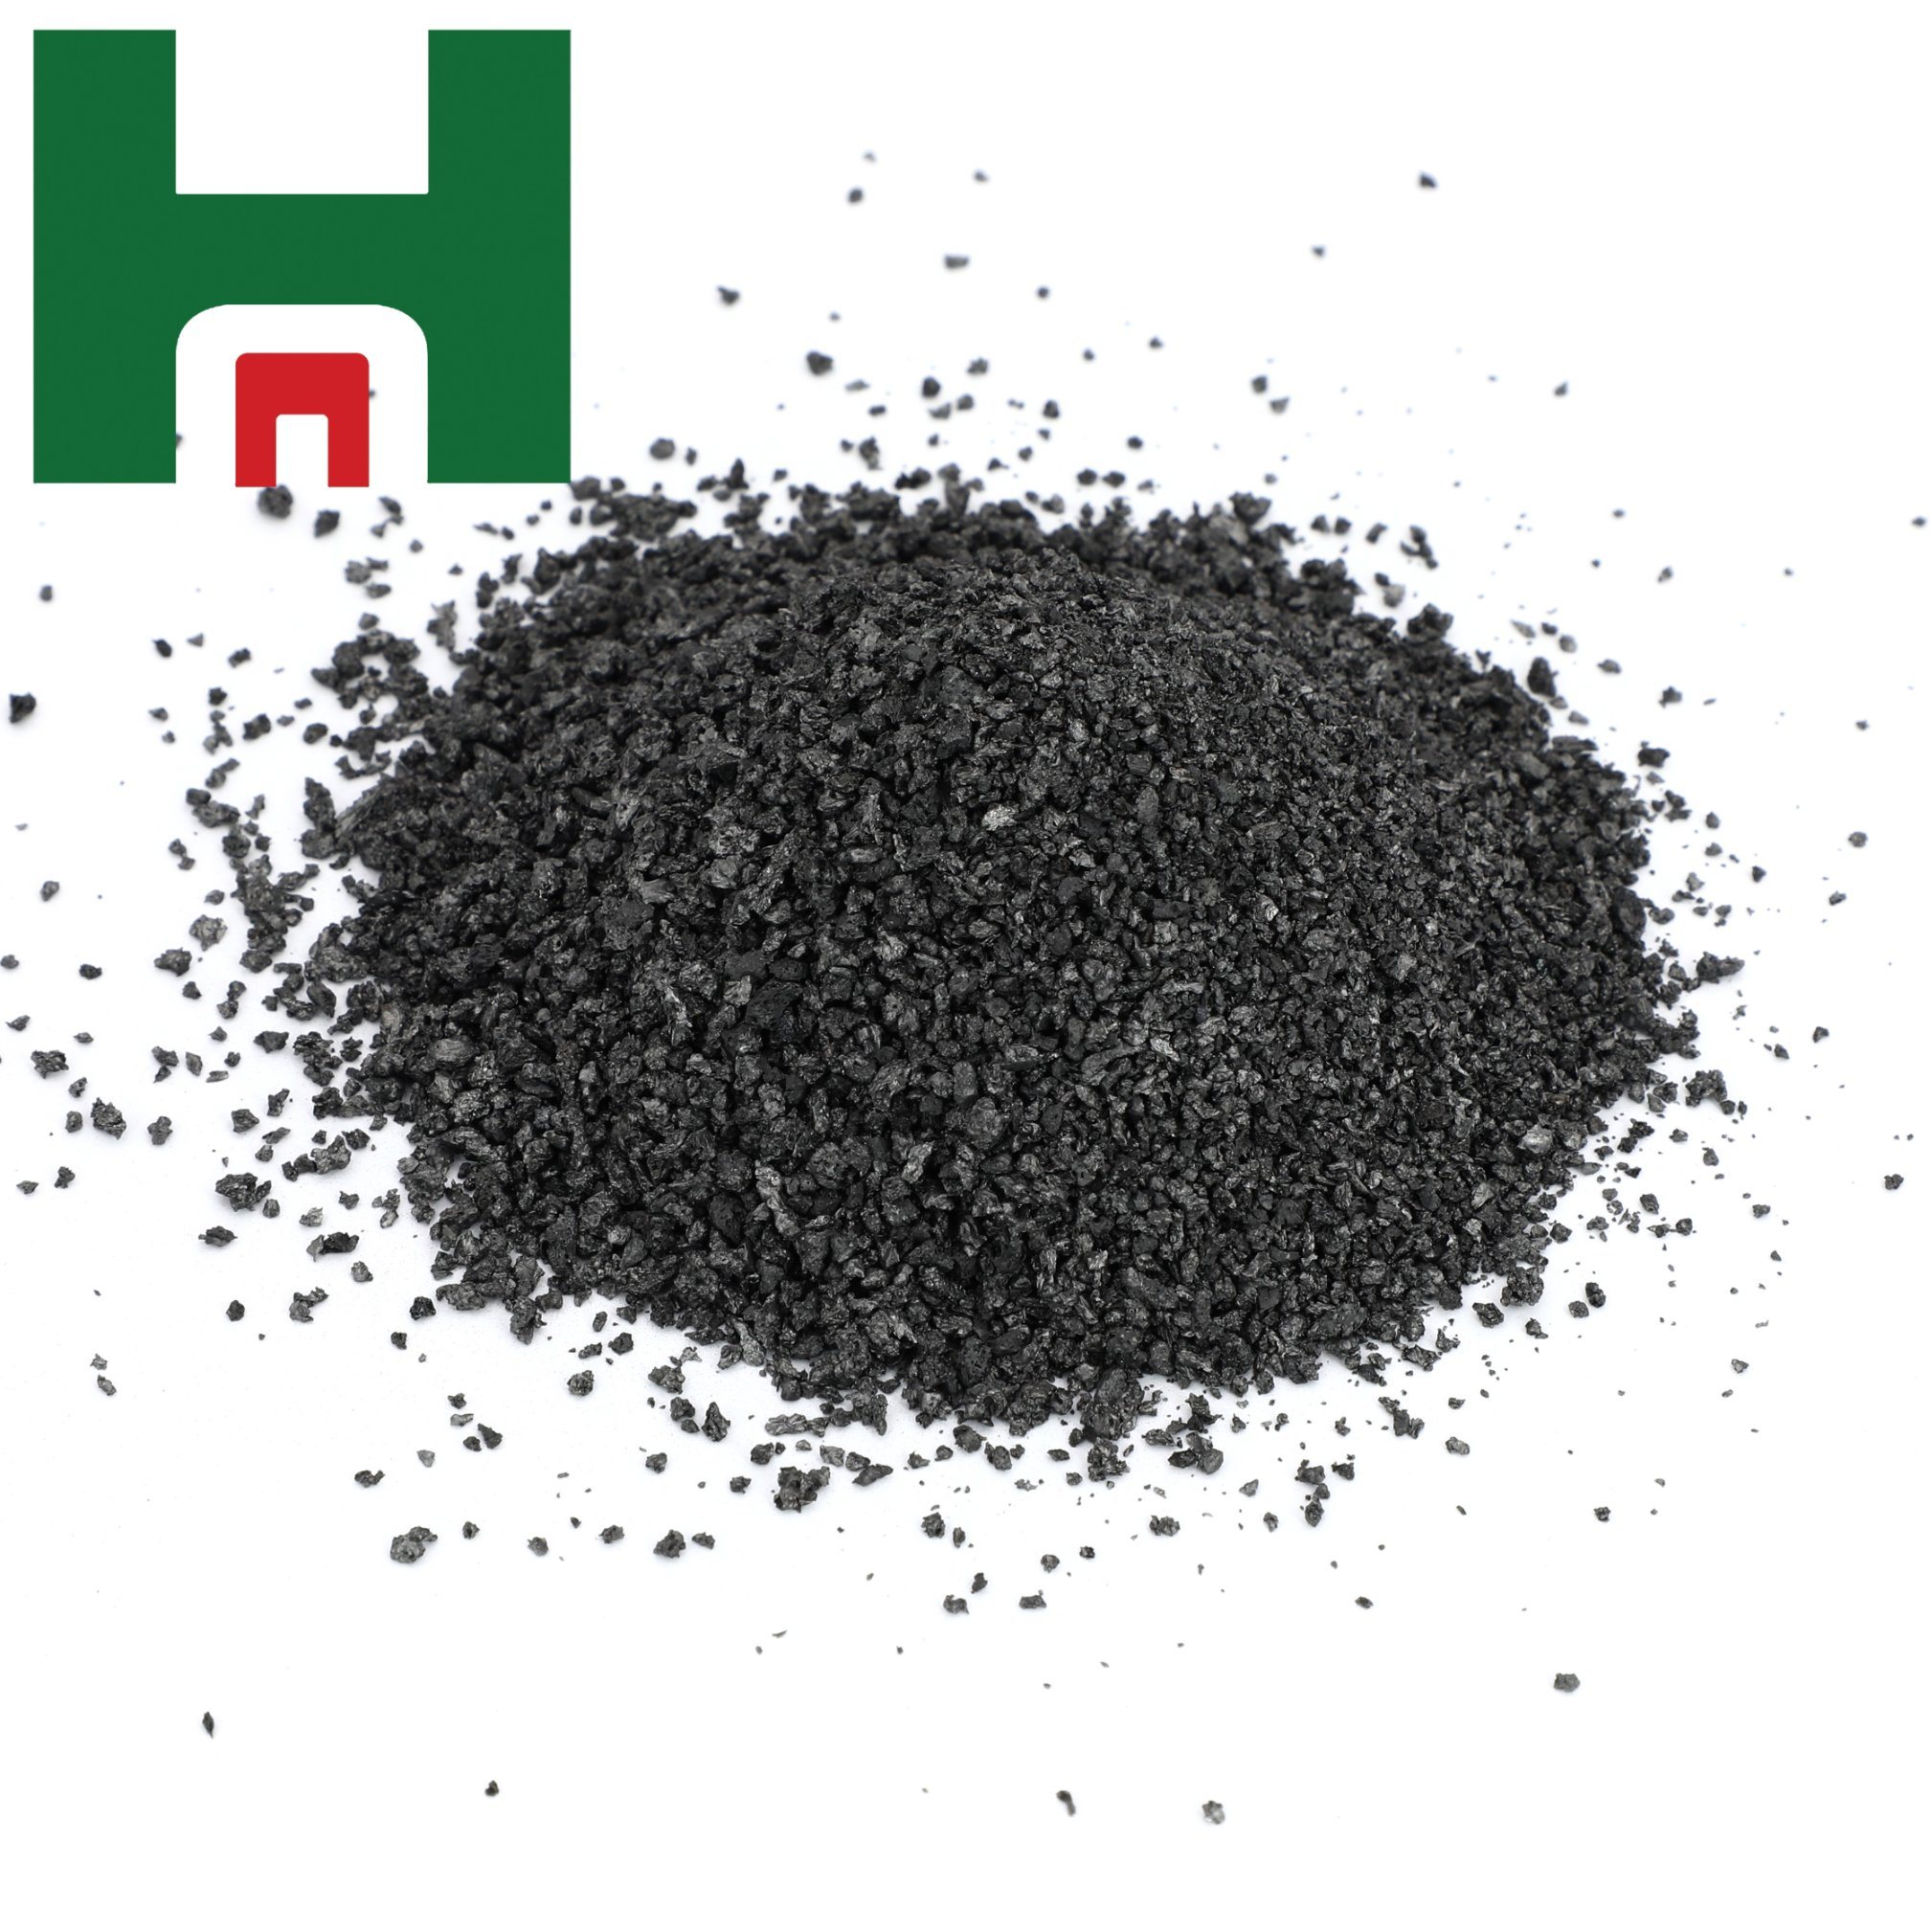 Calcined petro coke cpc for casting and steelmaking